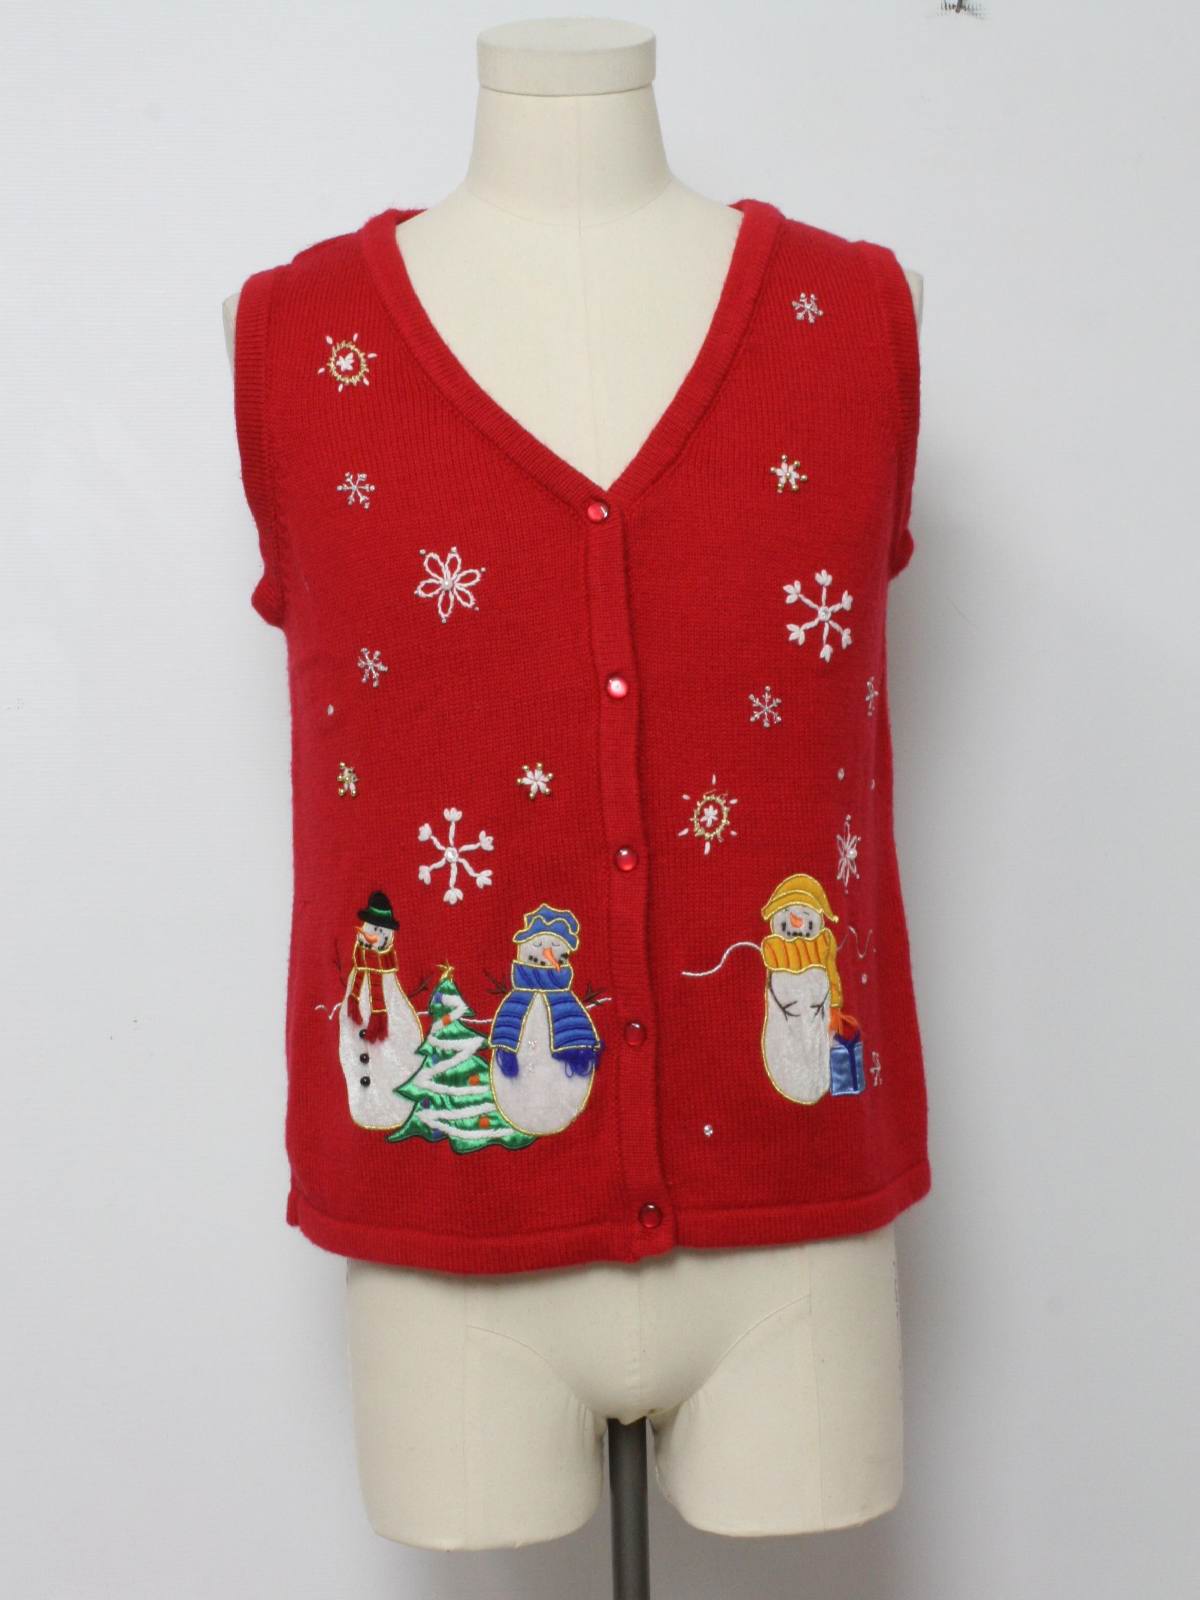 Womens Ugly Christmas Sweater Vest: -Care Label Only- Womens red ...